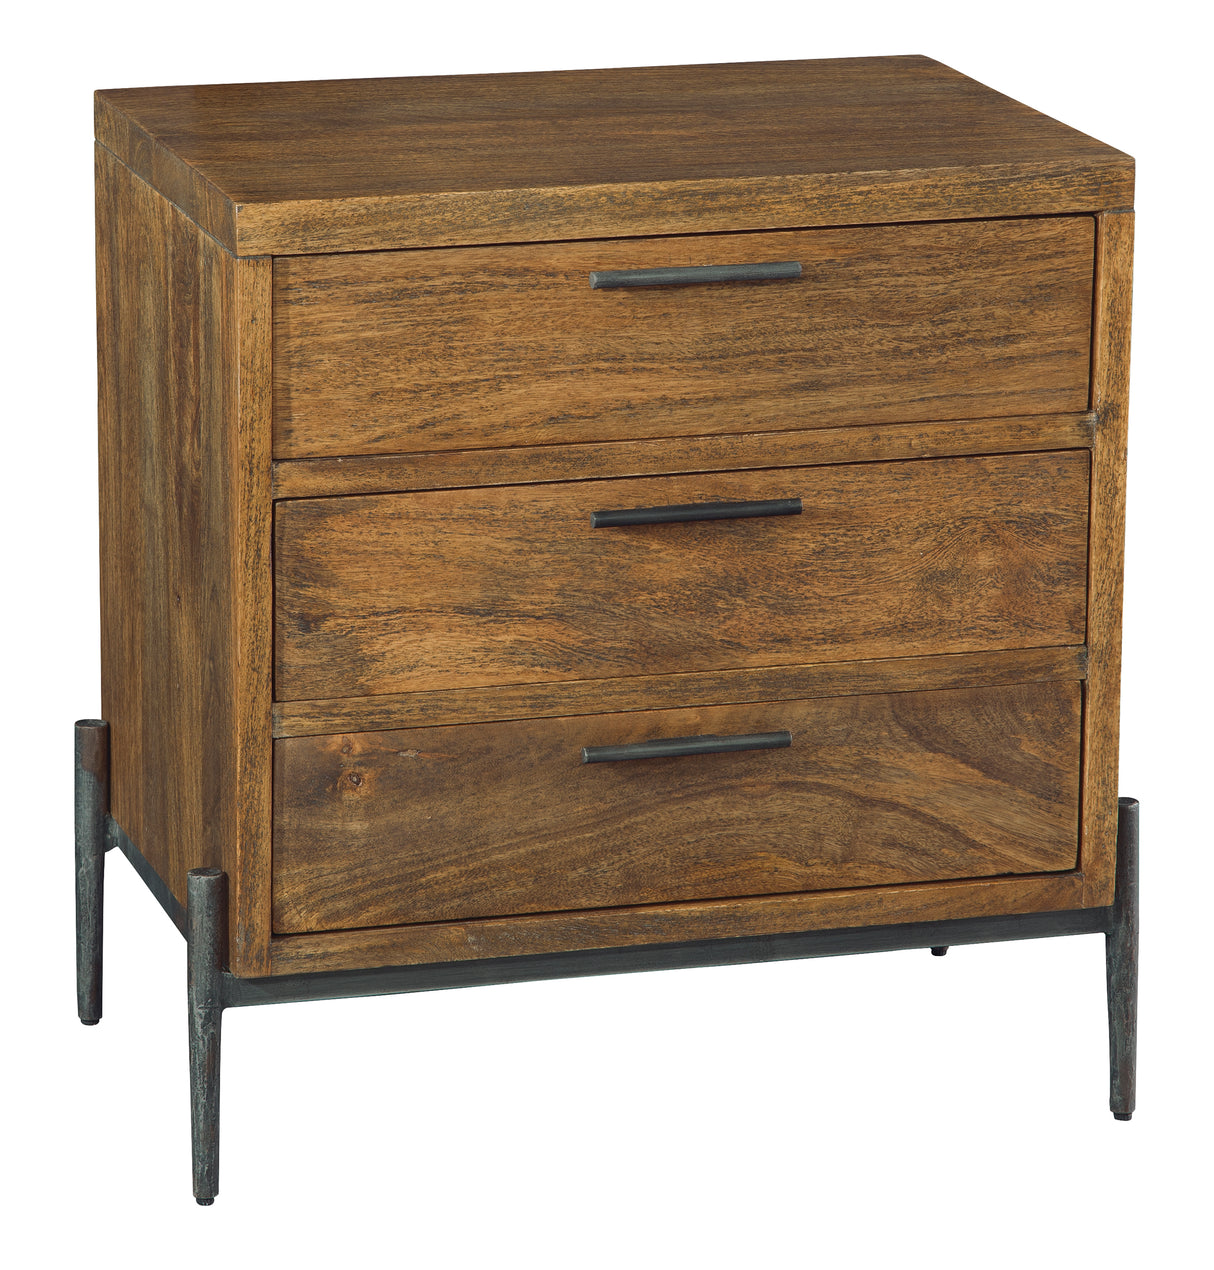 Hekman 23763 Bedford Park 30.25in. x 18.75in. x 28.5in. Three Drawer Night Stand